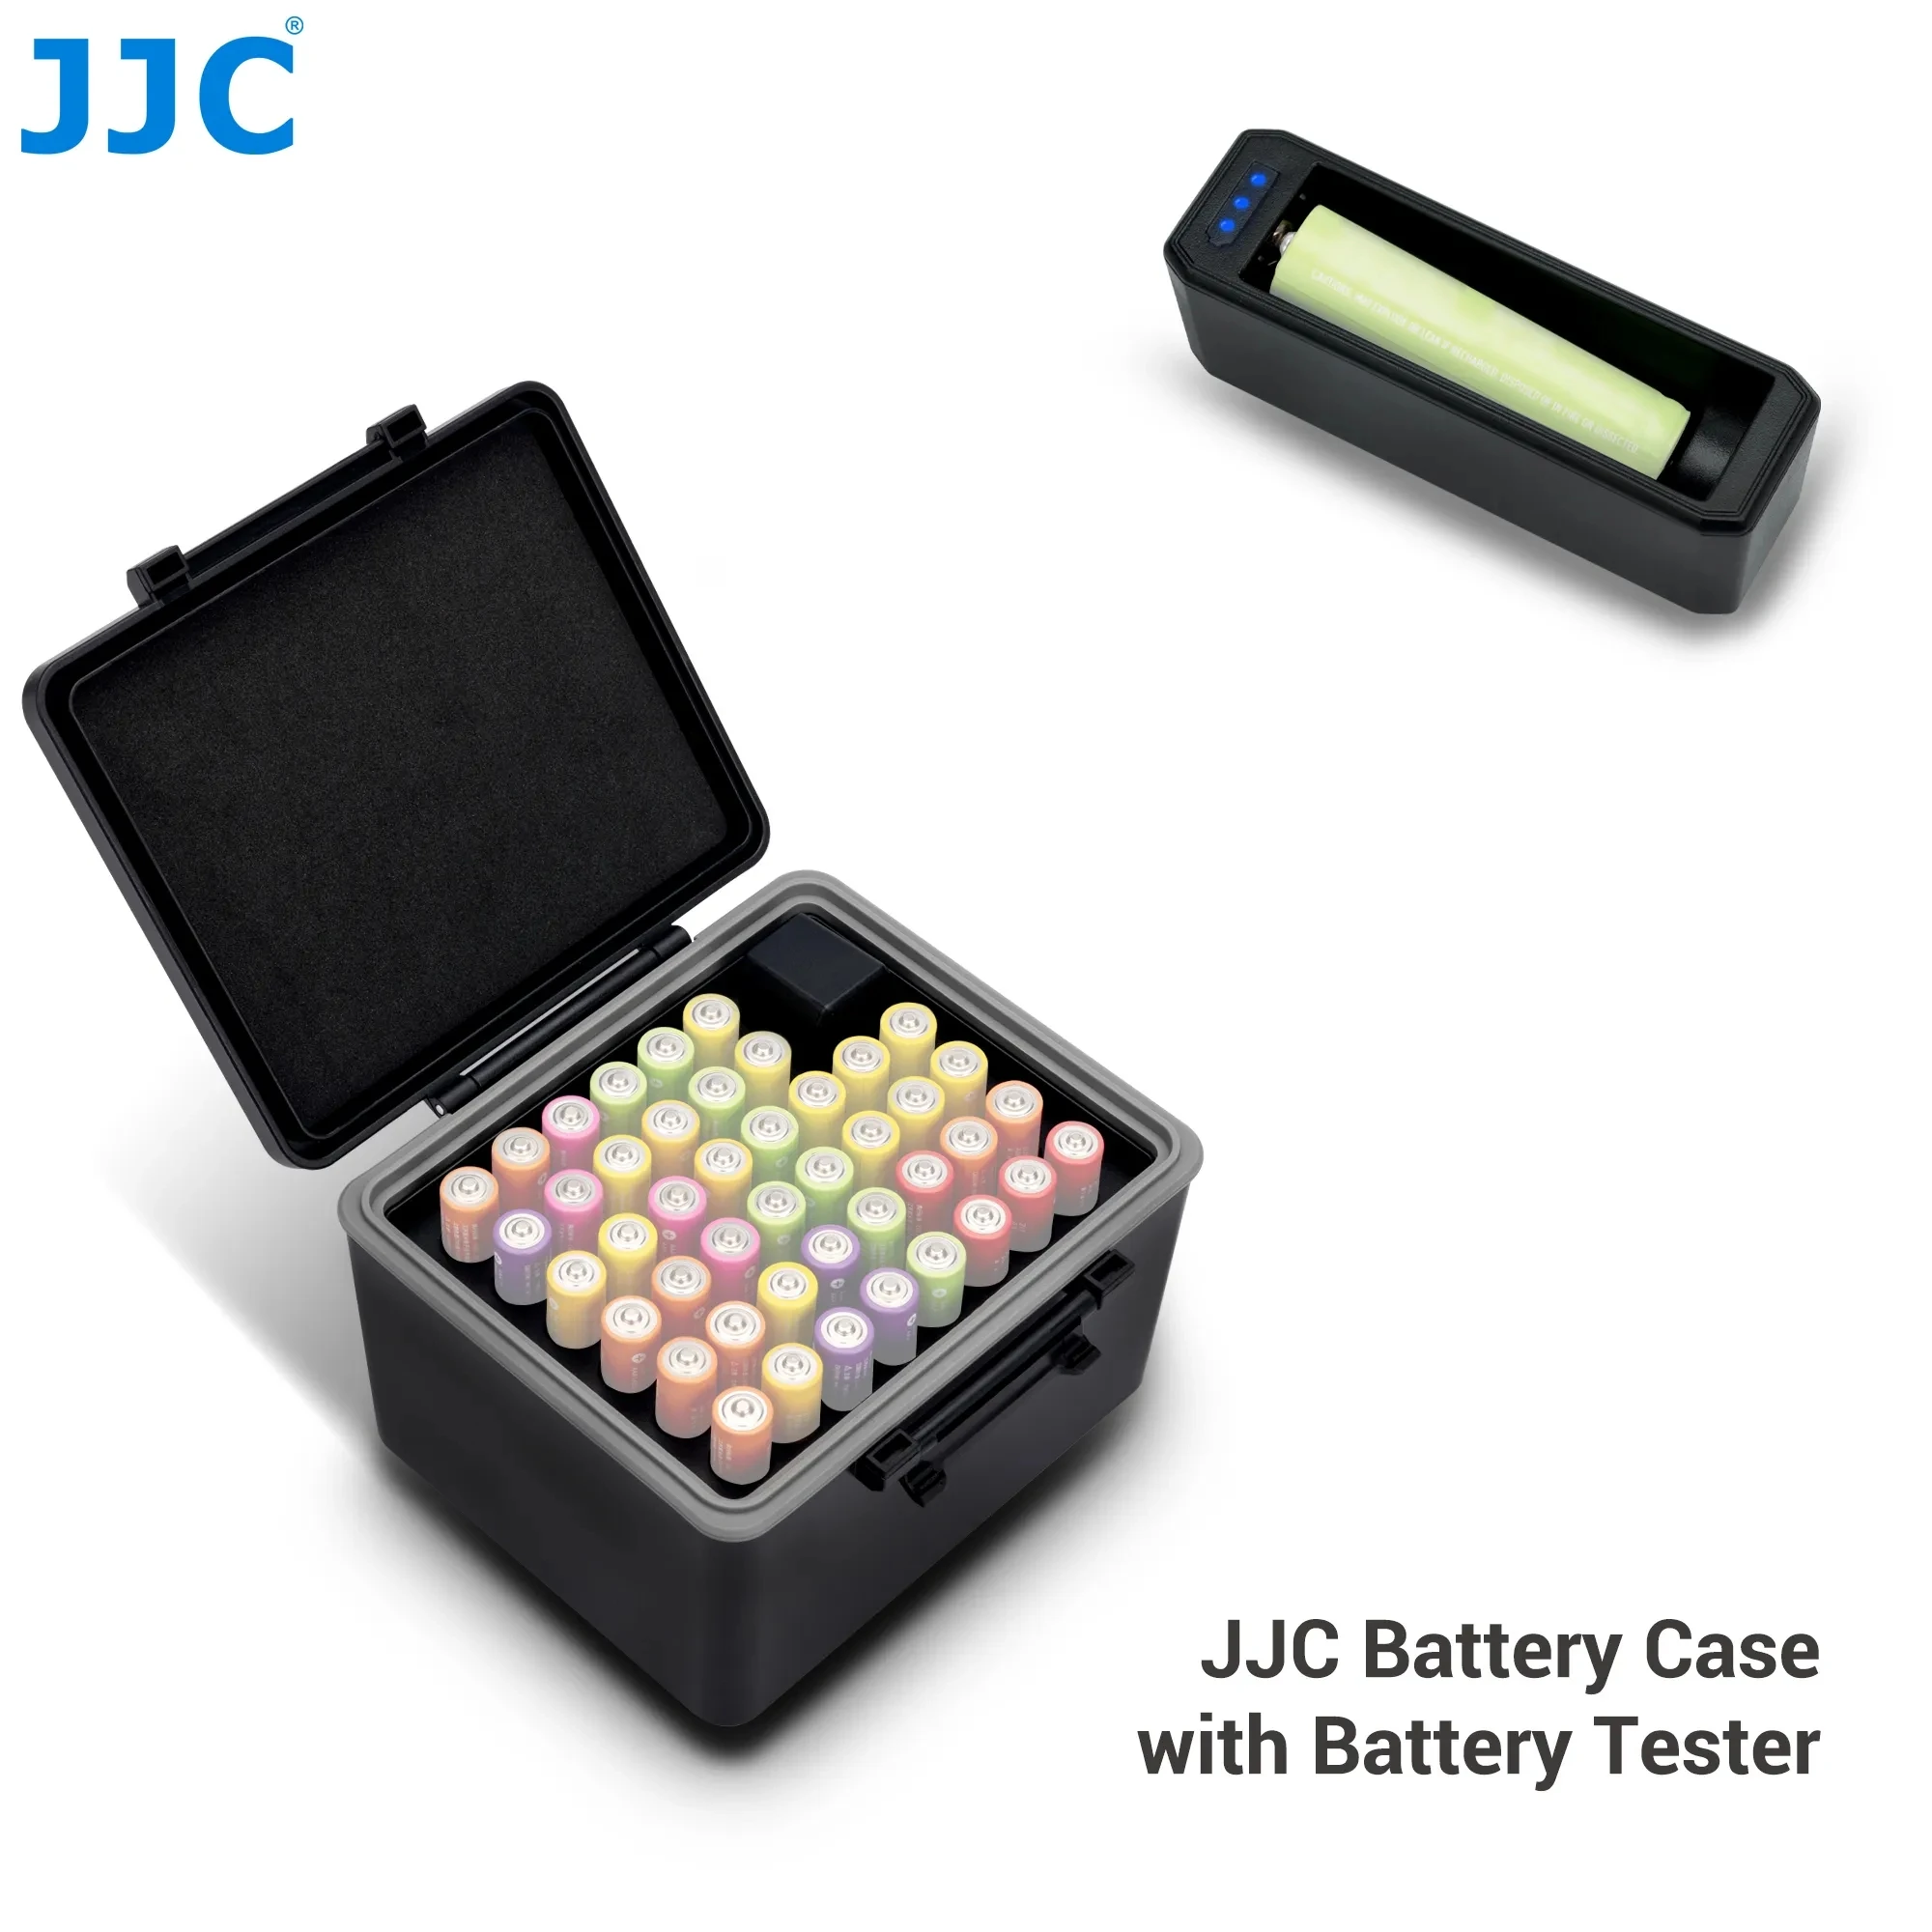 JJC 44 Slots Battery Case with Battery Tester for AA/AAA batteries Weterproof Hard Shell Battery Box Organizer for 18650 battery